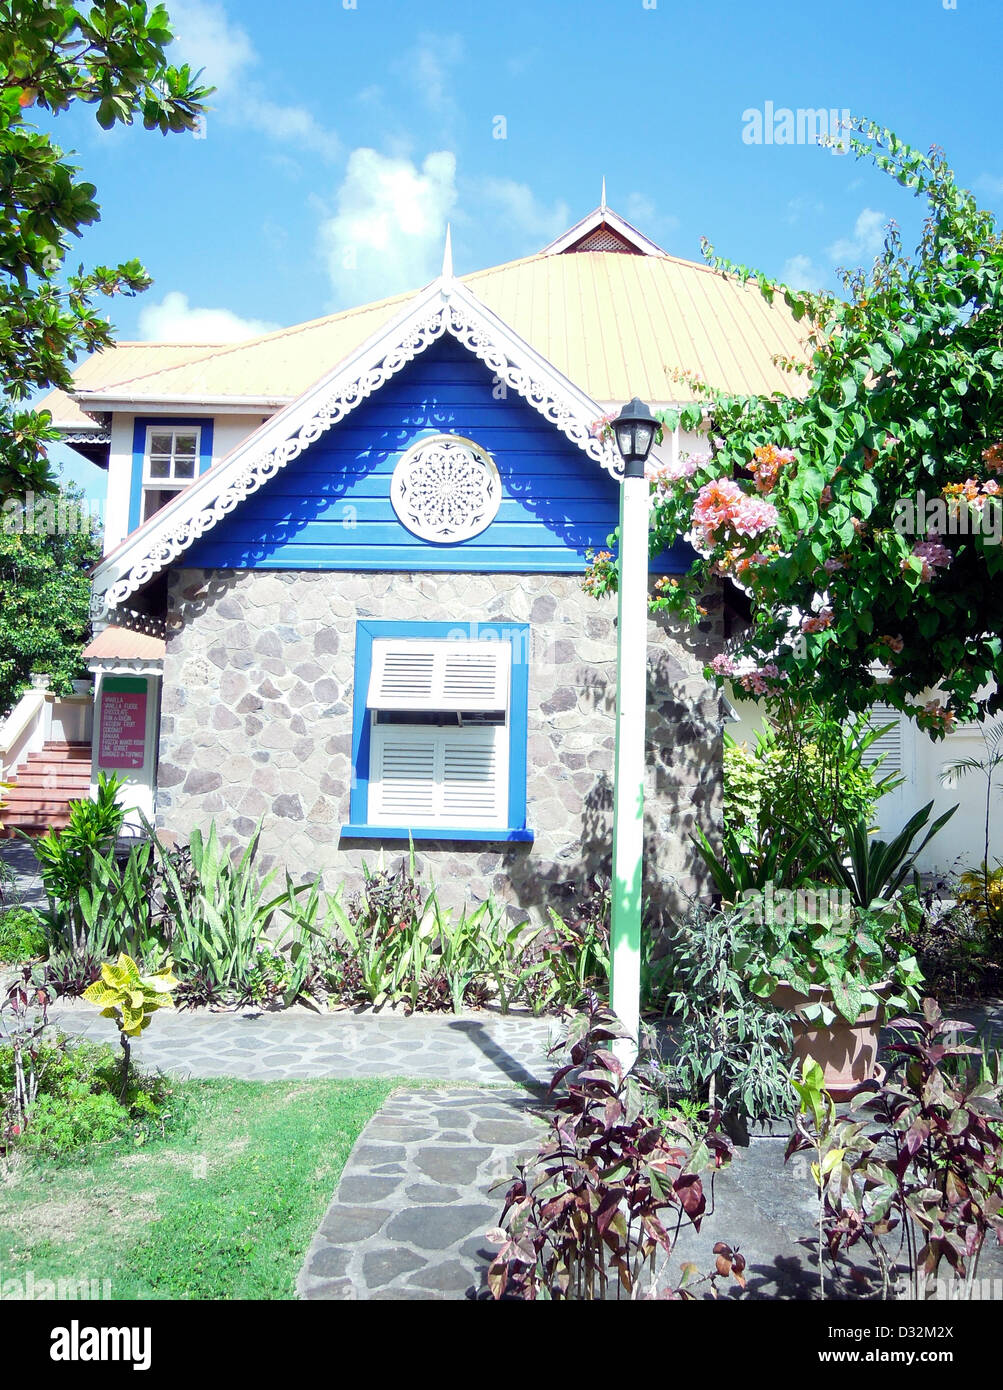 Caribbean style stone building with gingerbread trim Bequia St. Vincent and the Grenadines town of Port Elizabeth Stock Photo